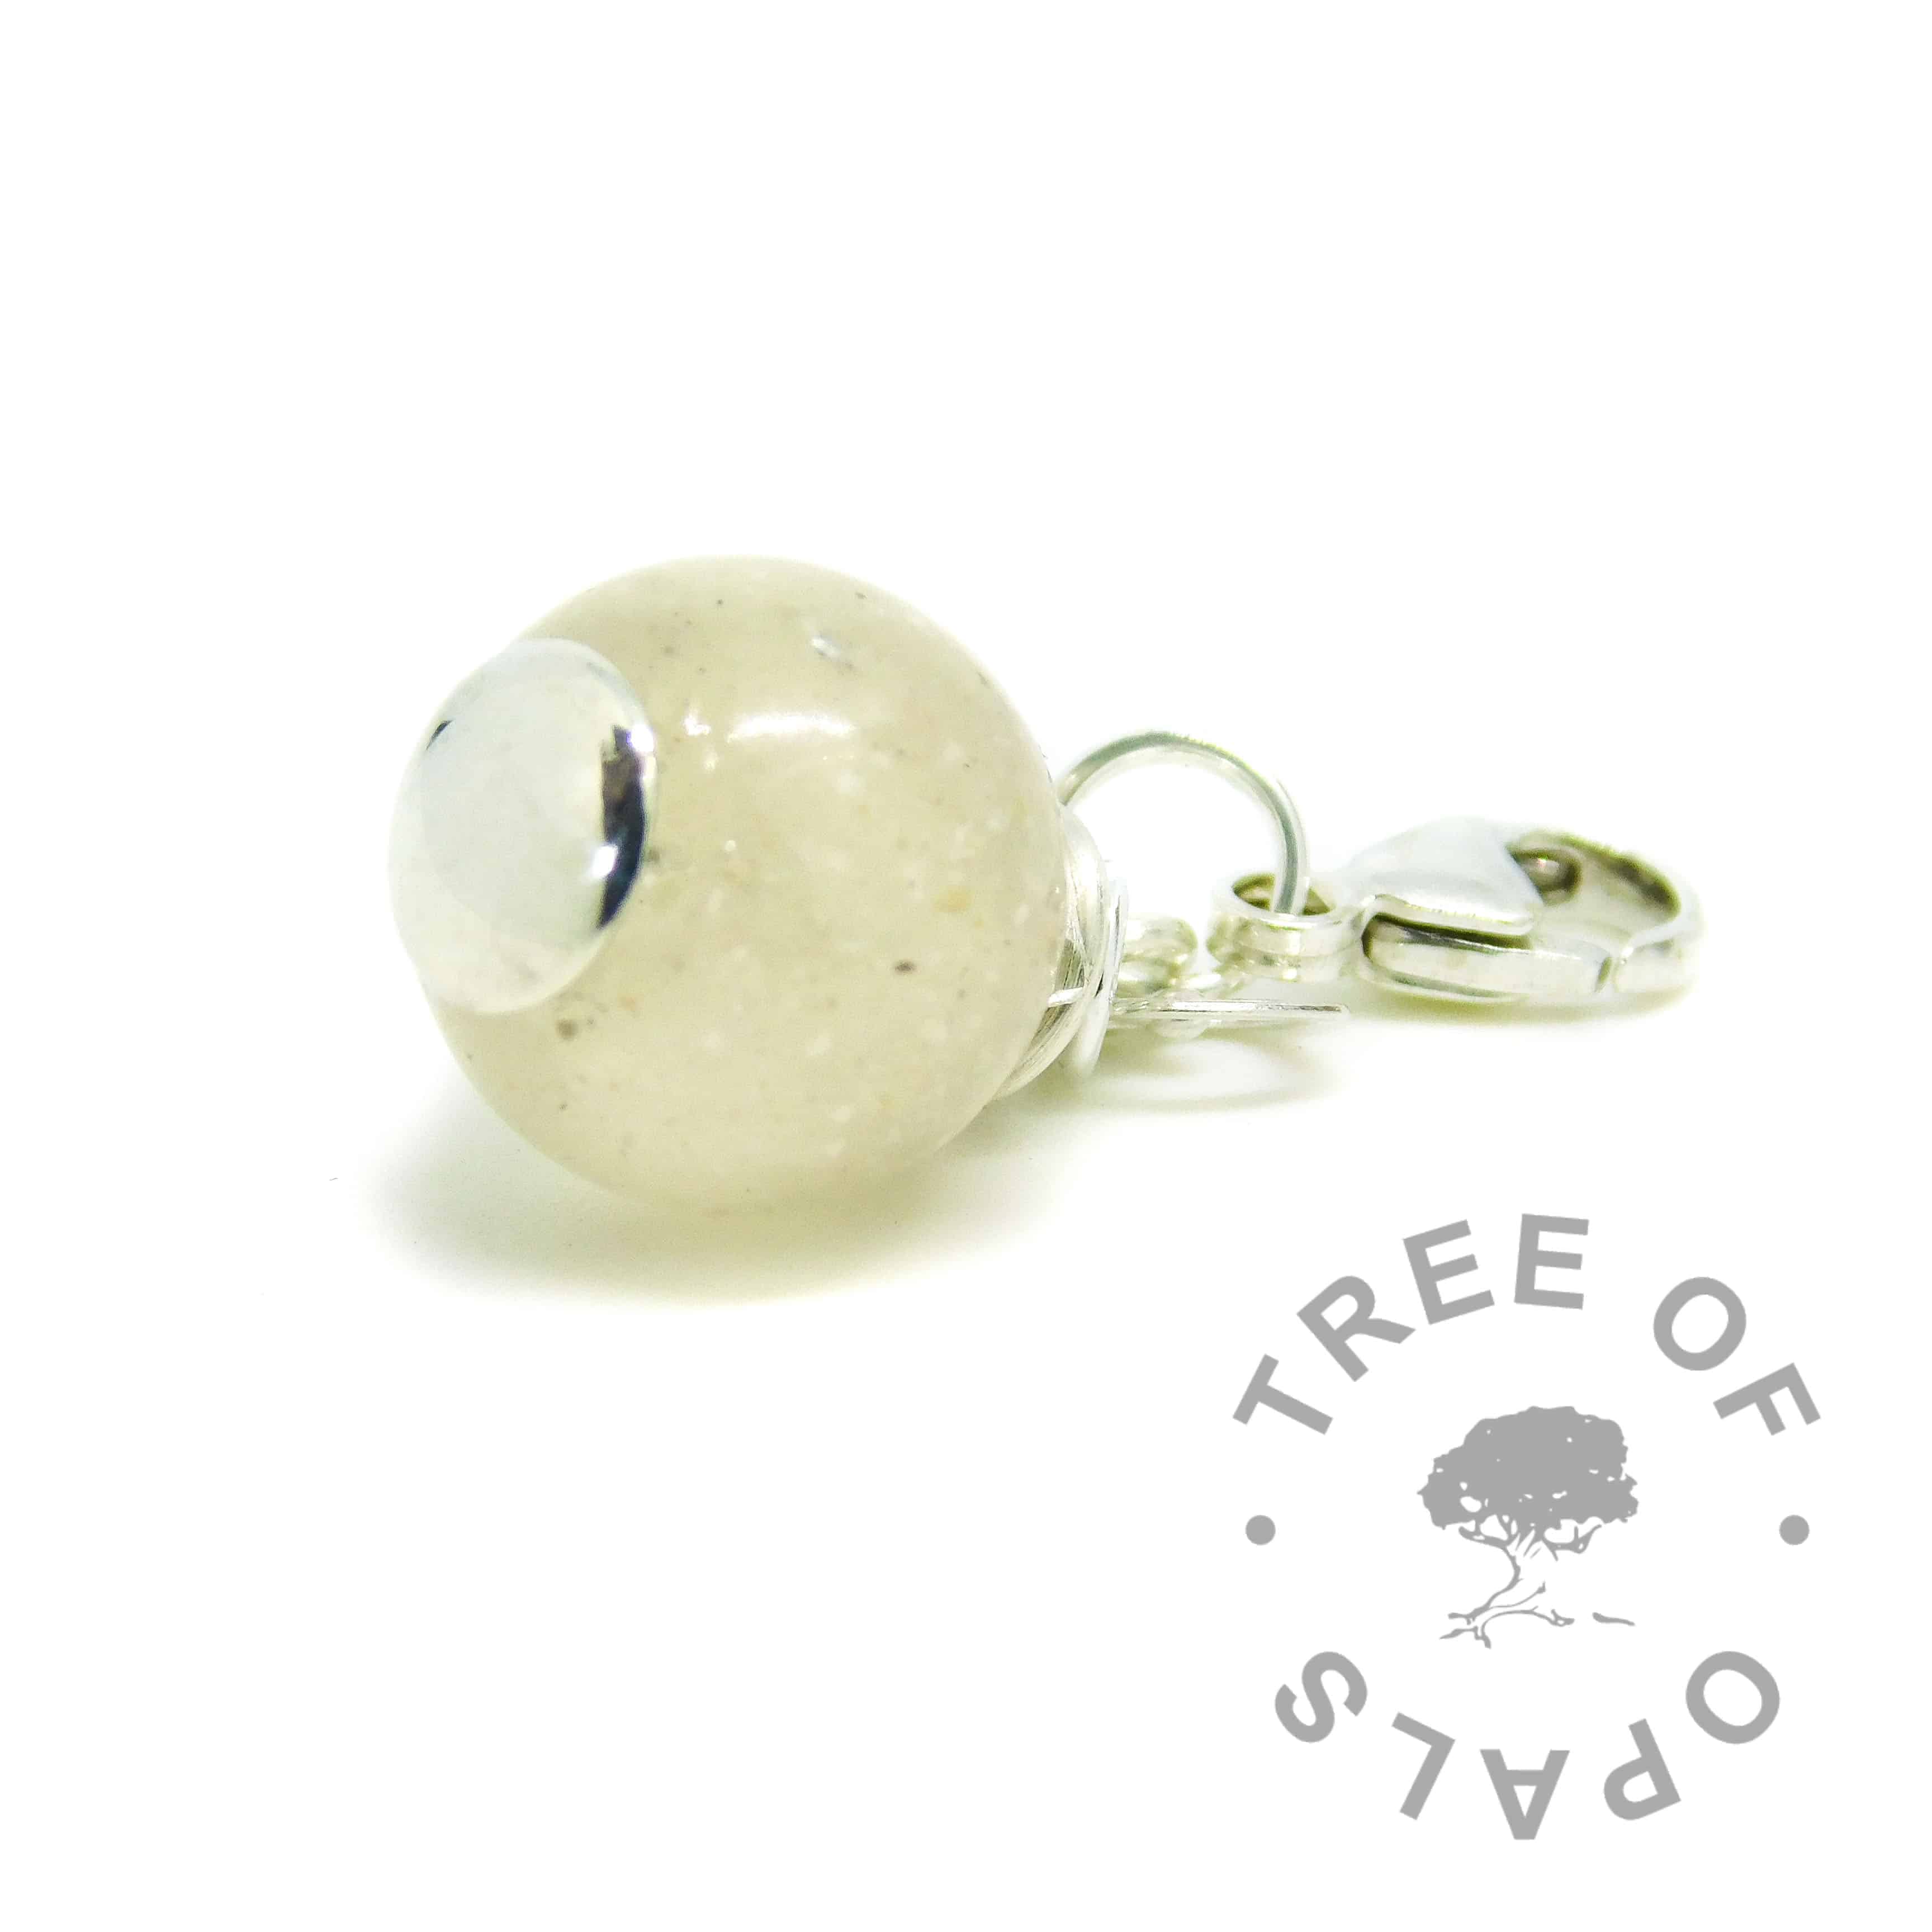 Handmade solid sterling silver cremation ash dangle charm pearl for Thomas Sabo style bracelets, lobster clasp, resin and cremation ashes with unicorn white sparkle mix. New style flat base!